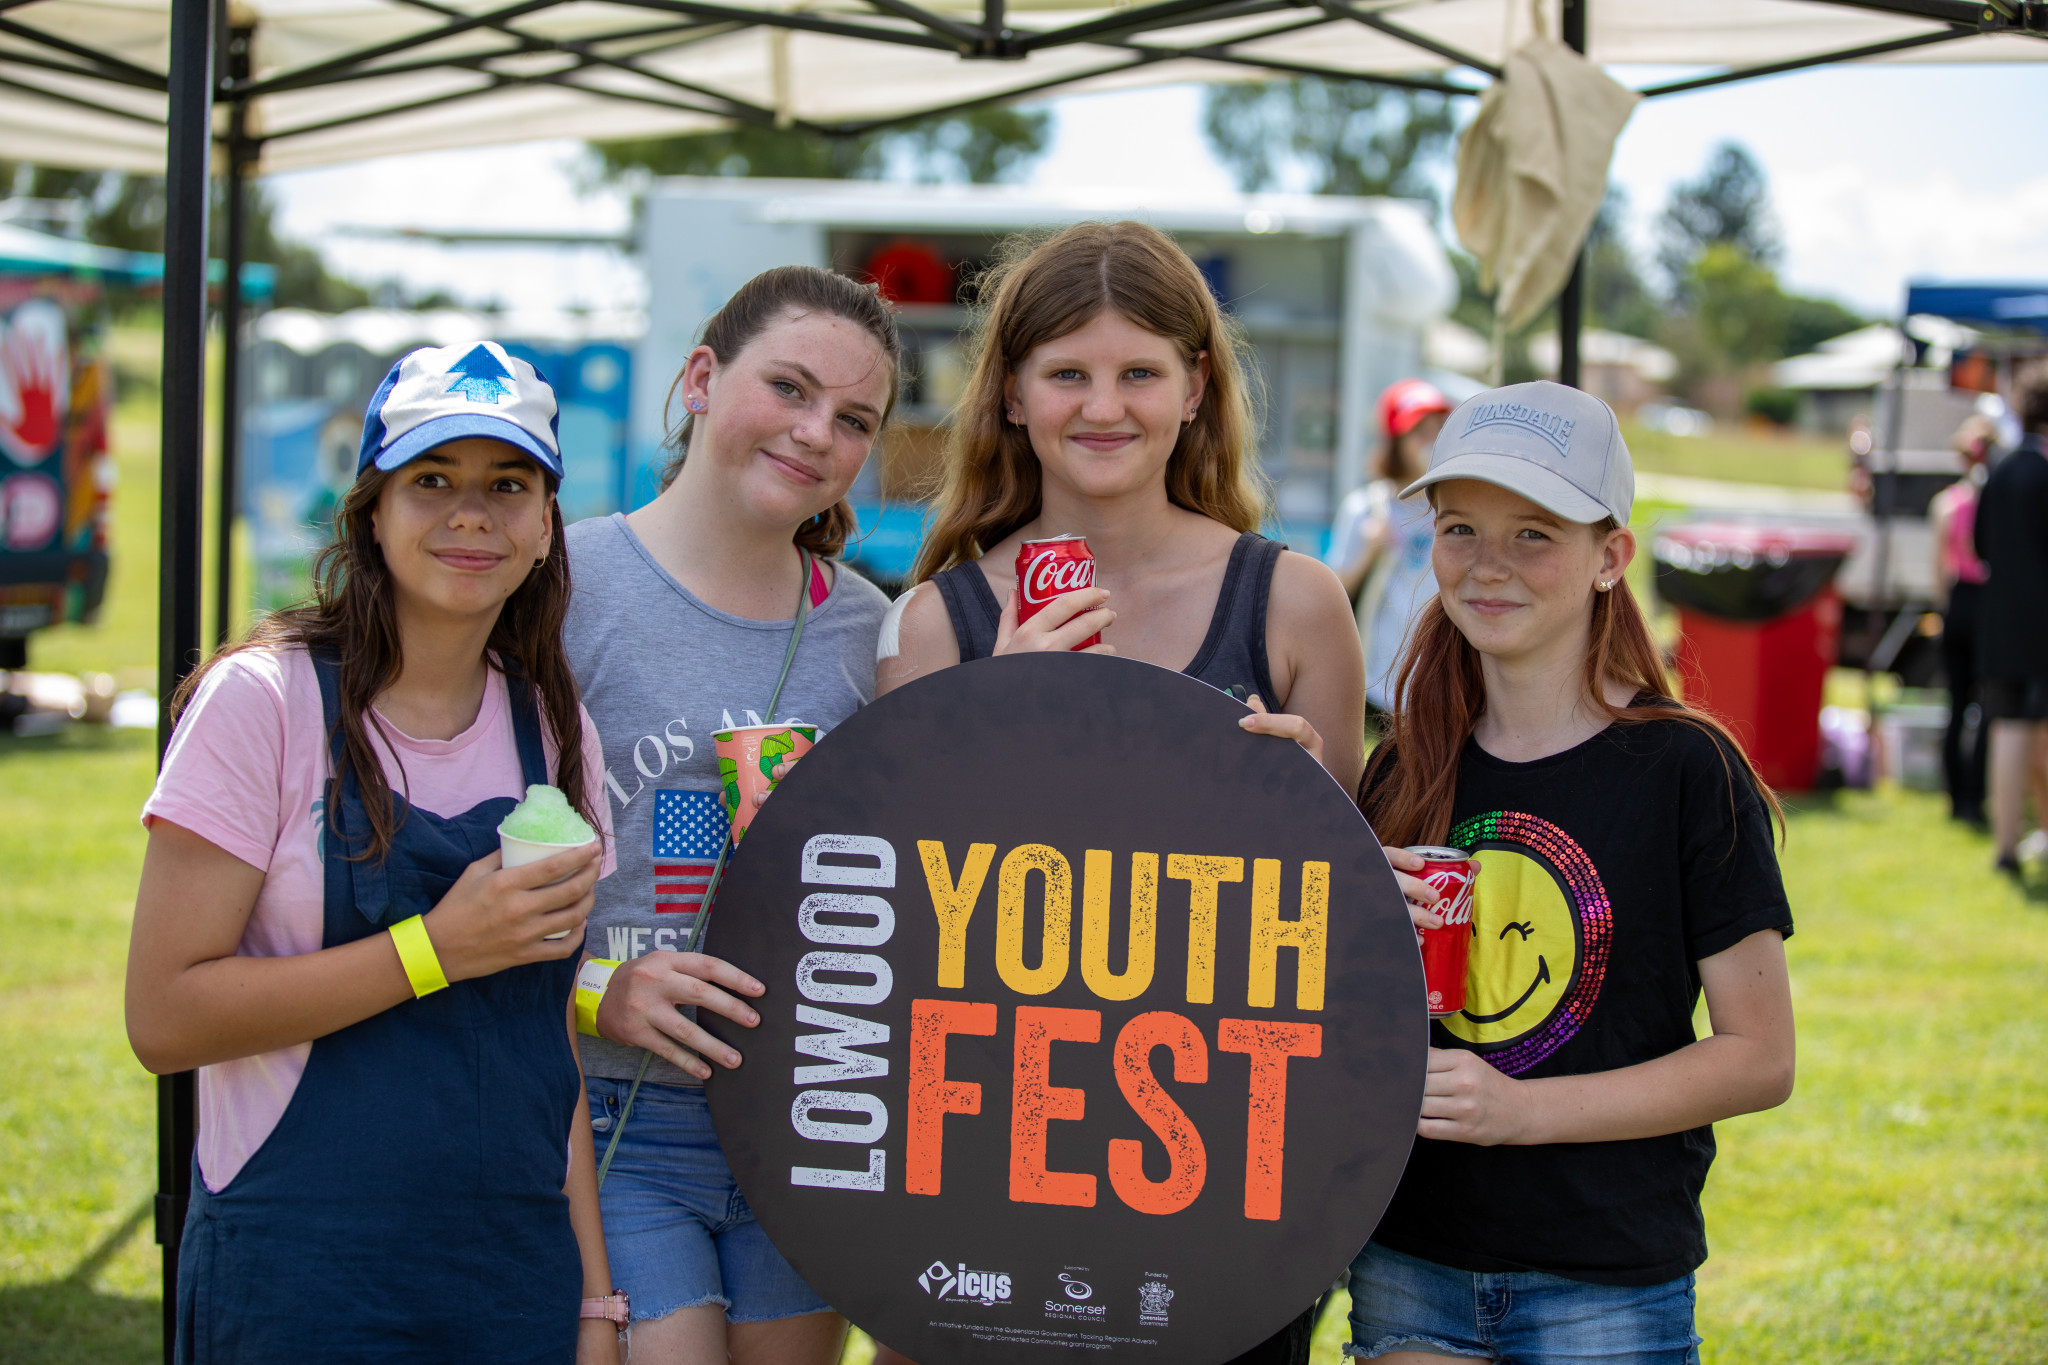 Youthfest fun - feature photo